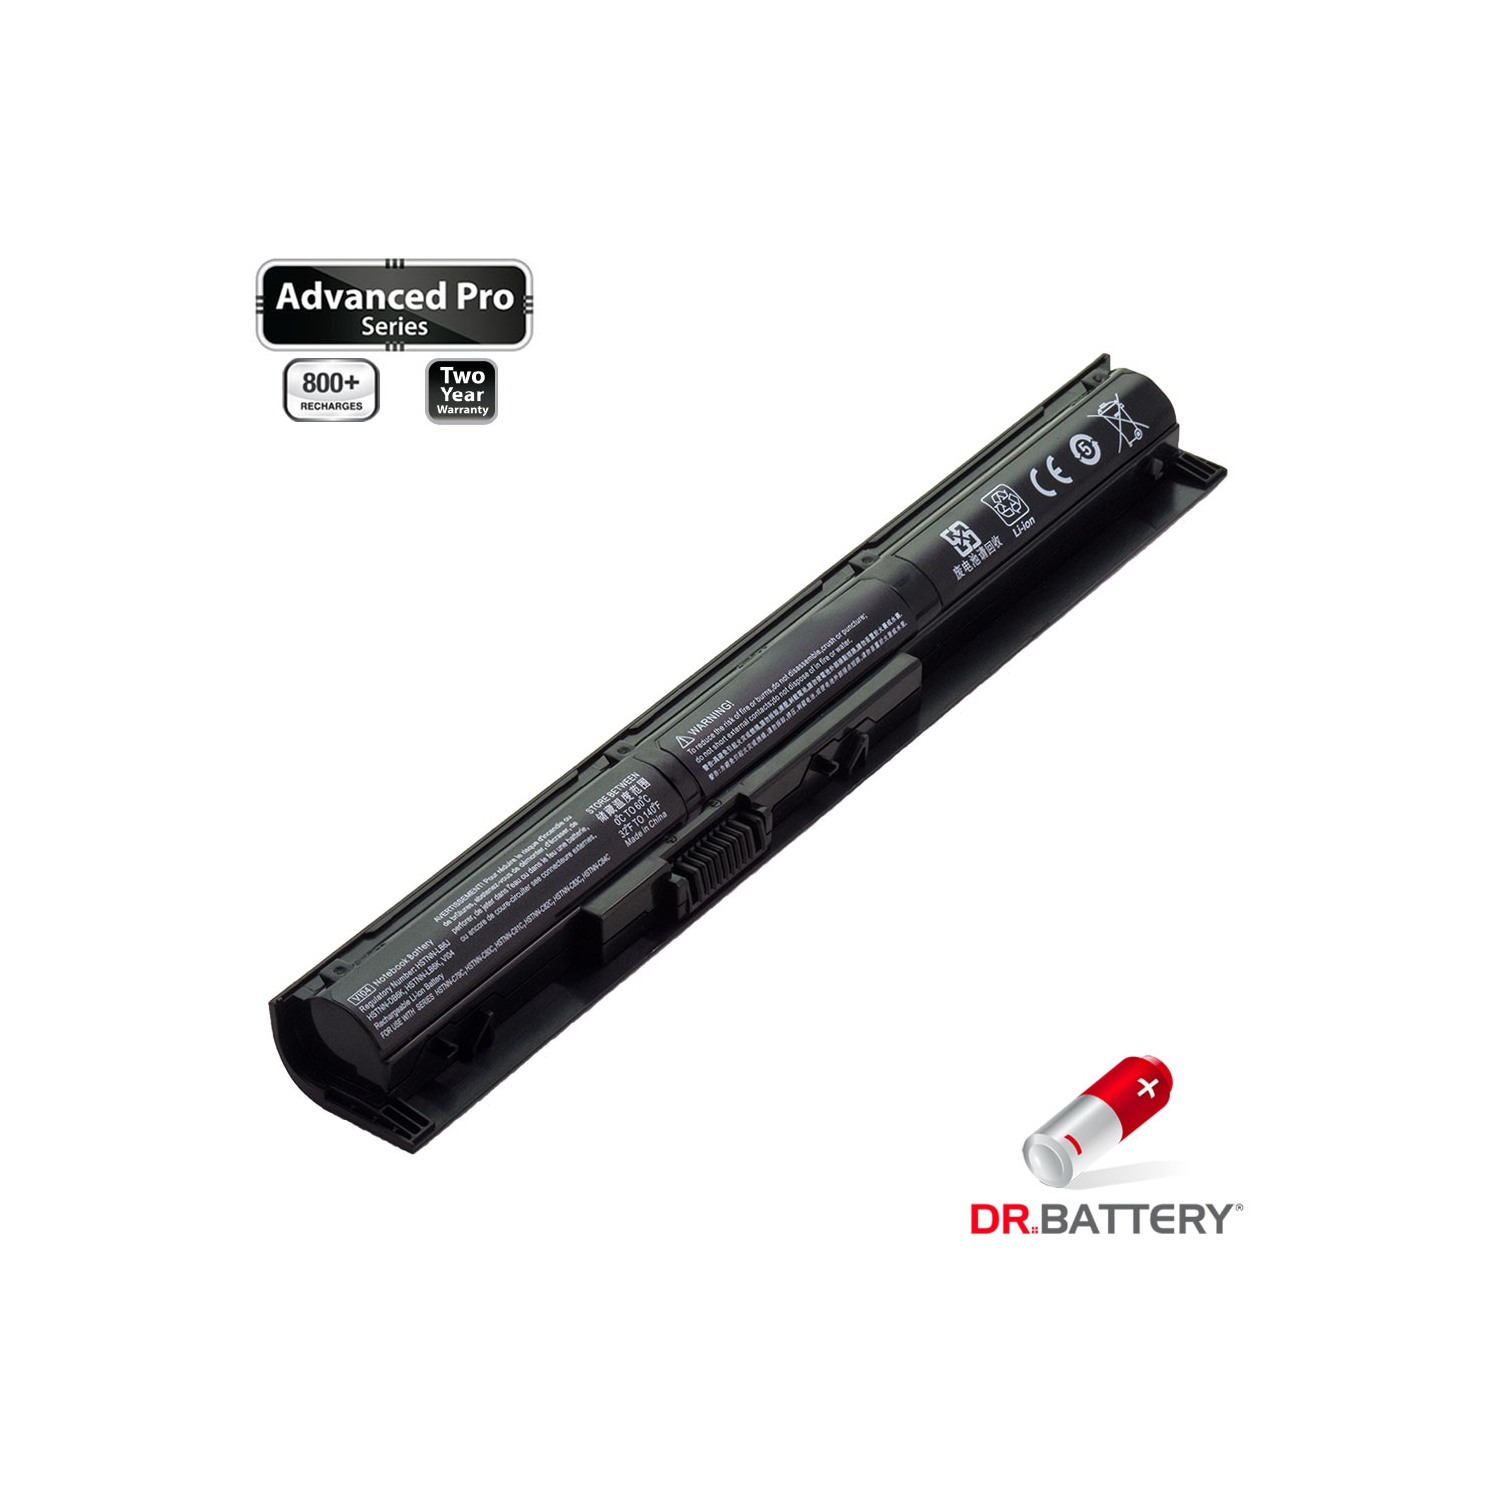 Dr. Battery - Samsung SDI Cells for HP ProBook 440 G2 / 450 G2 / 455 G2 / 756744-001 / 756745-001 - Free Shipping